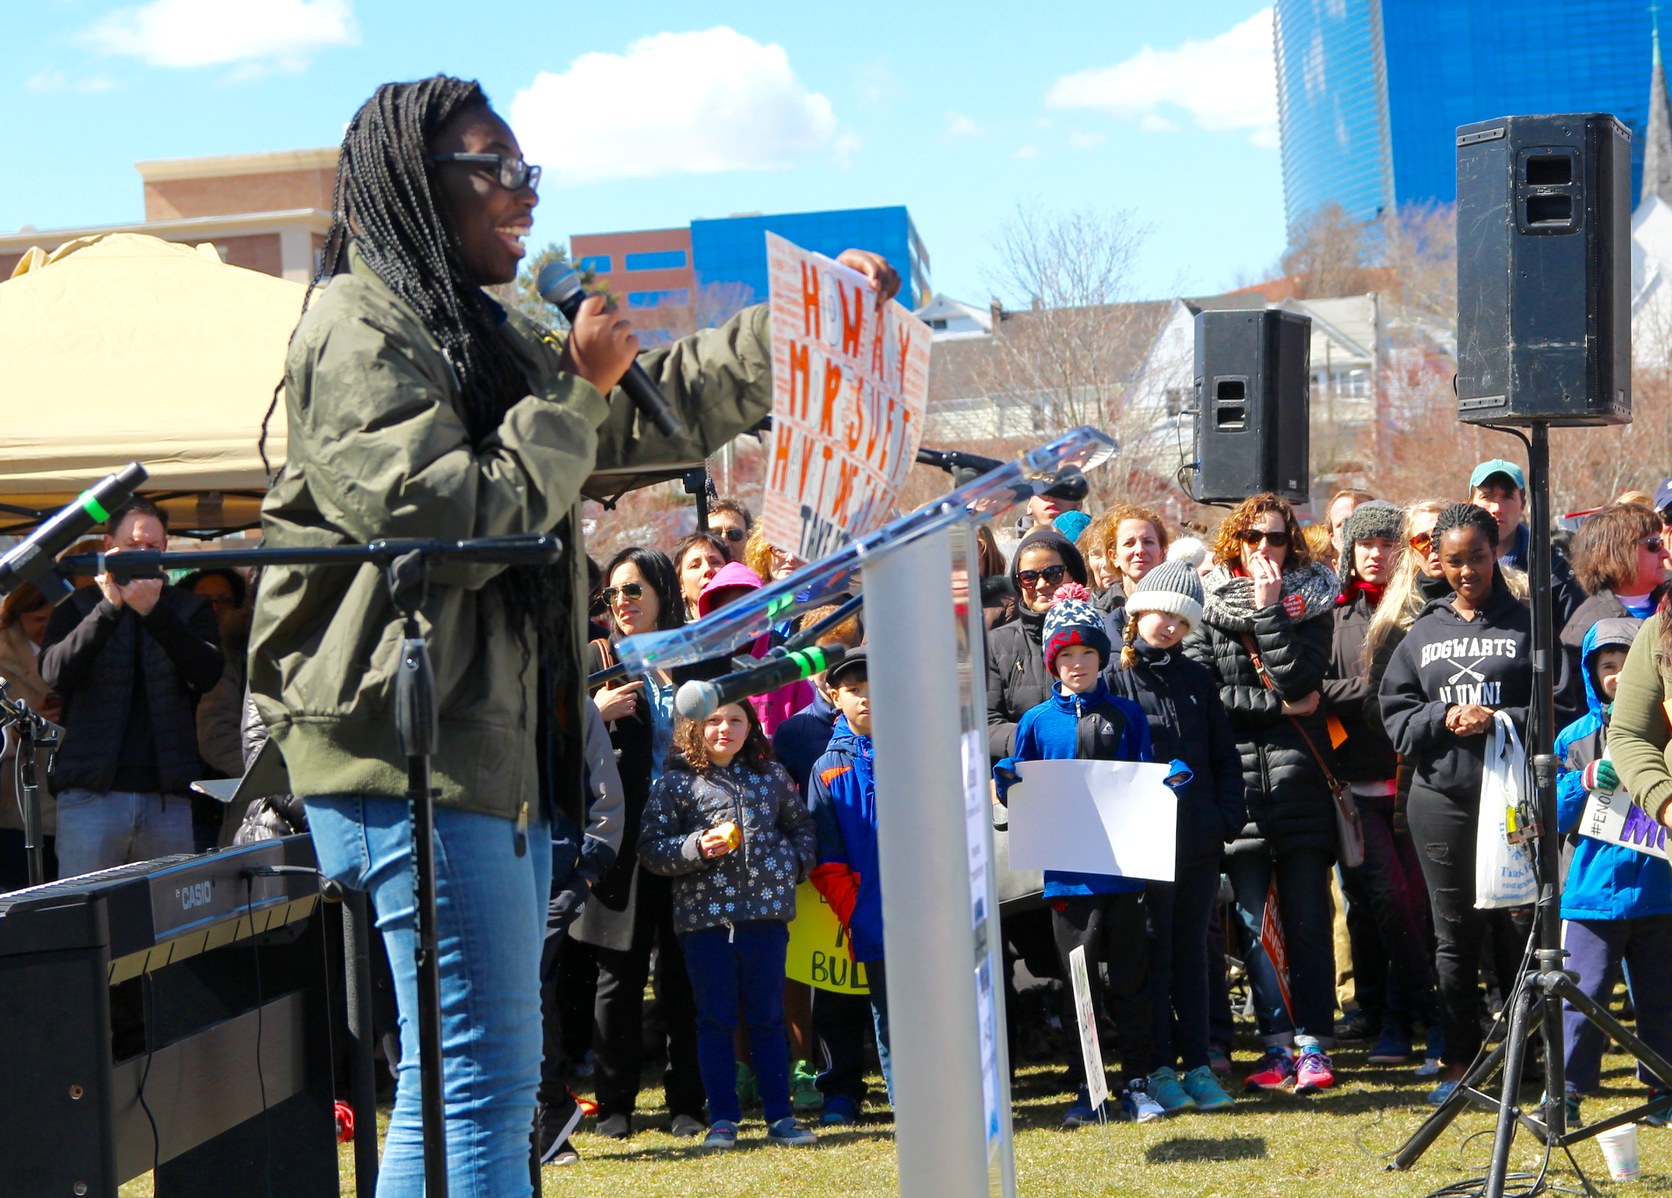 Brianna Jean, a Stamford High School senior addressed hundreds gathered in Mill River Park in Stamford on March 24, 2018 Photo: Leslie Yager